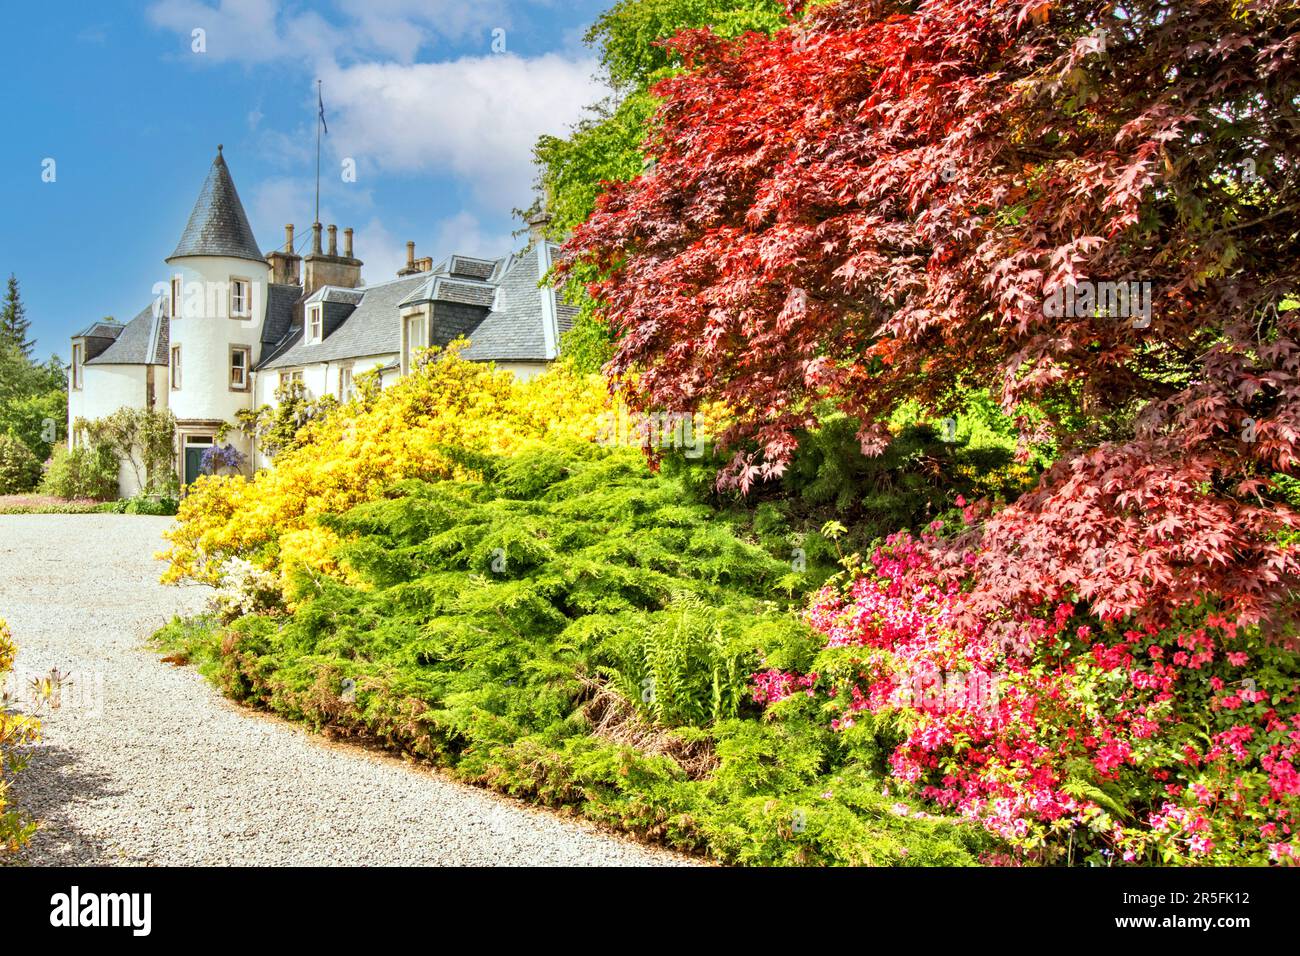 Attadale Gardens Wester Ross Scotland the white house and gardens a red Acer tree and fragrant yellow Azalea flowers Stock Photo